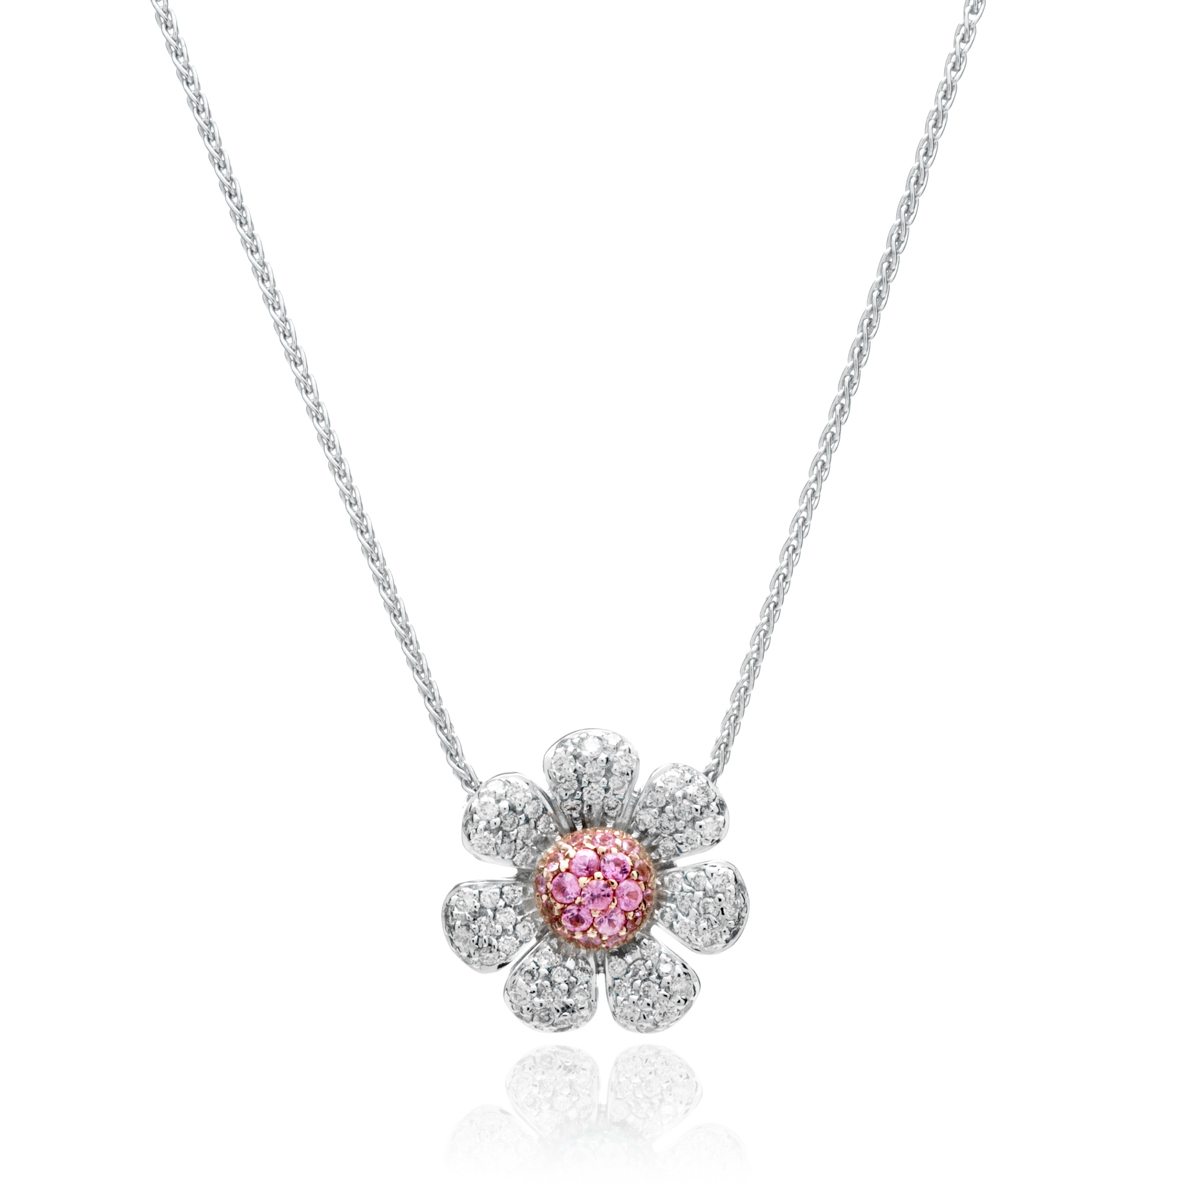 PINK SAPPHIRE AND DIAMOND PENDANT NECKLACE, The Weekly Edit: Fine Jewels, London, 2020